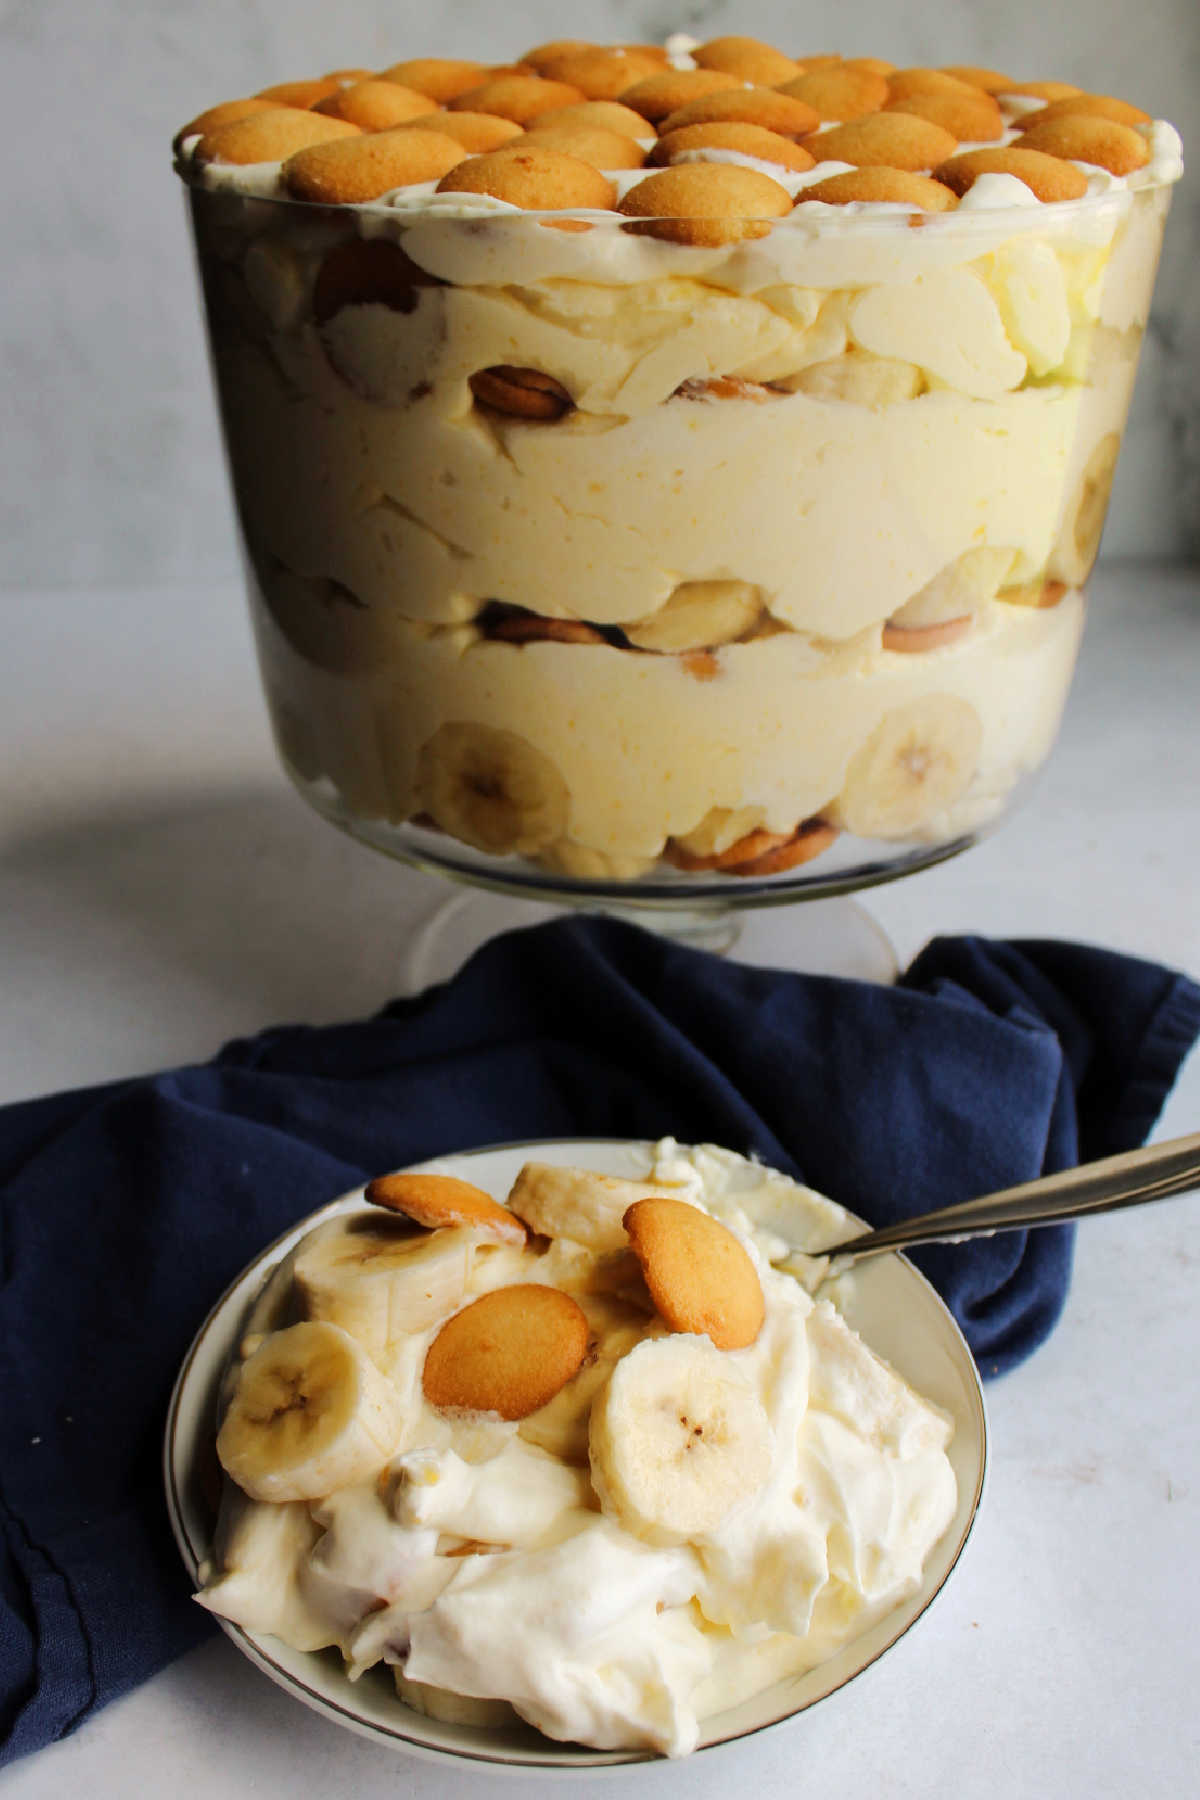 Serving of creamy banana pudding in bowl with remaining pudding in trifle bowl in the background.